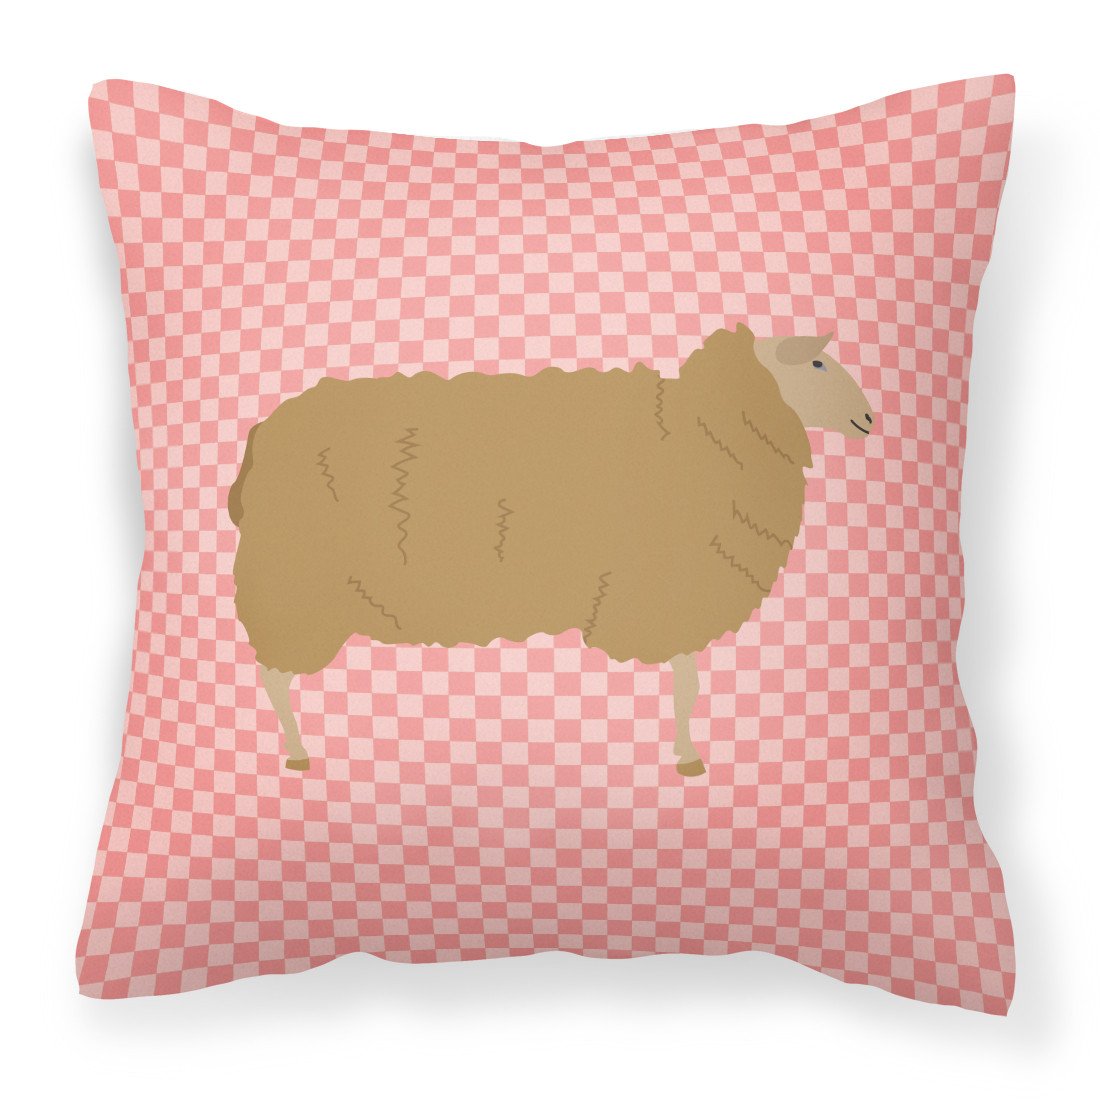 East Friesian Sheep Pink Check Fabric Decorative Pillow BB7977PW1818 by Caroline's Treasures